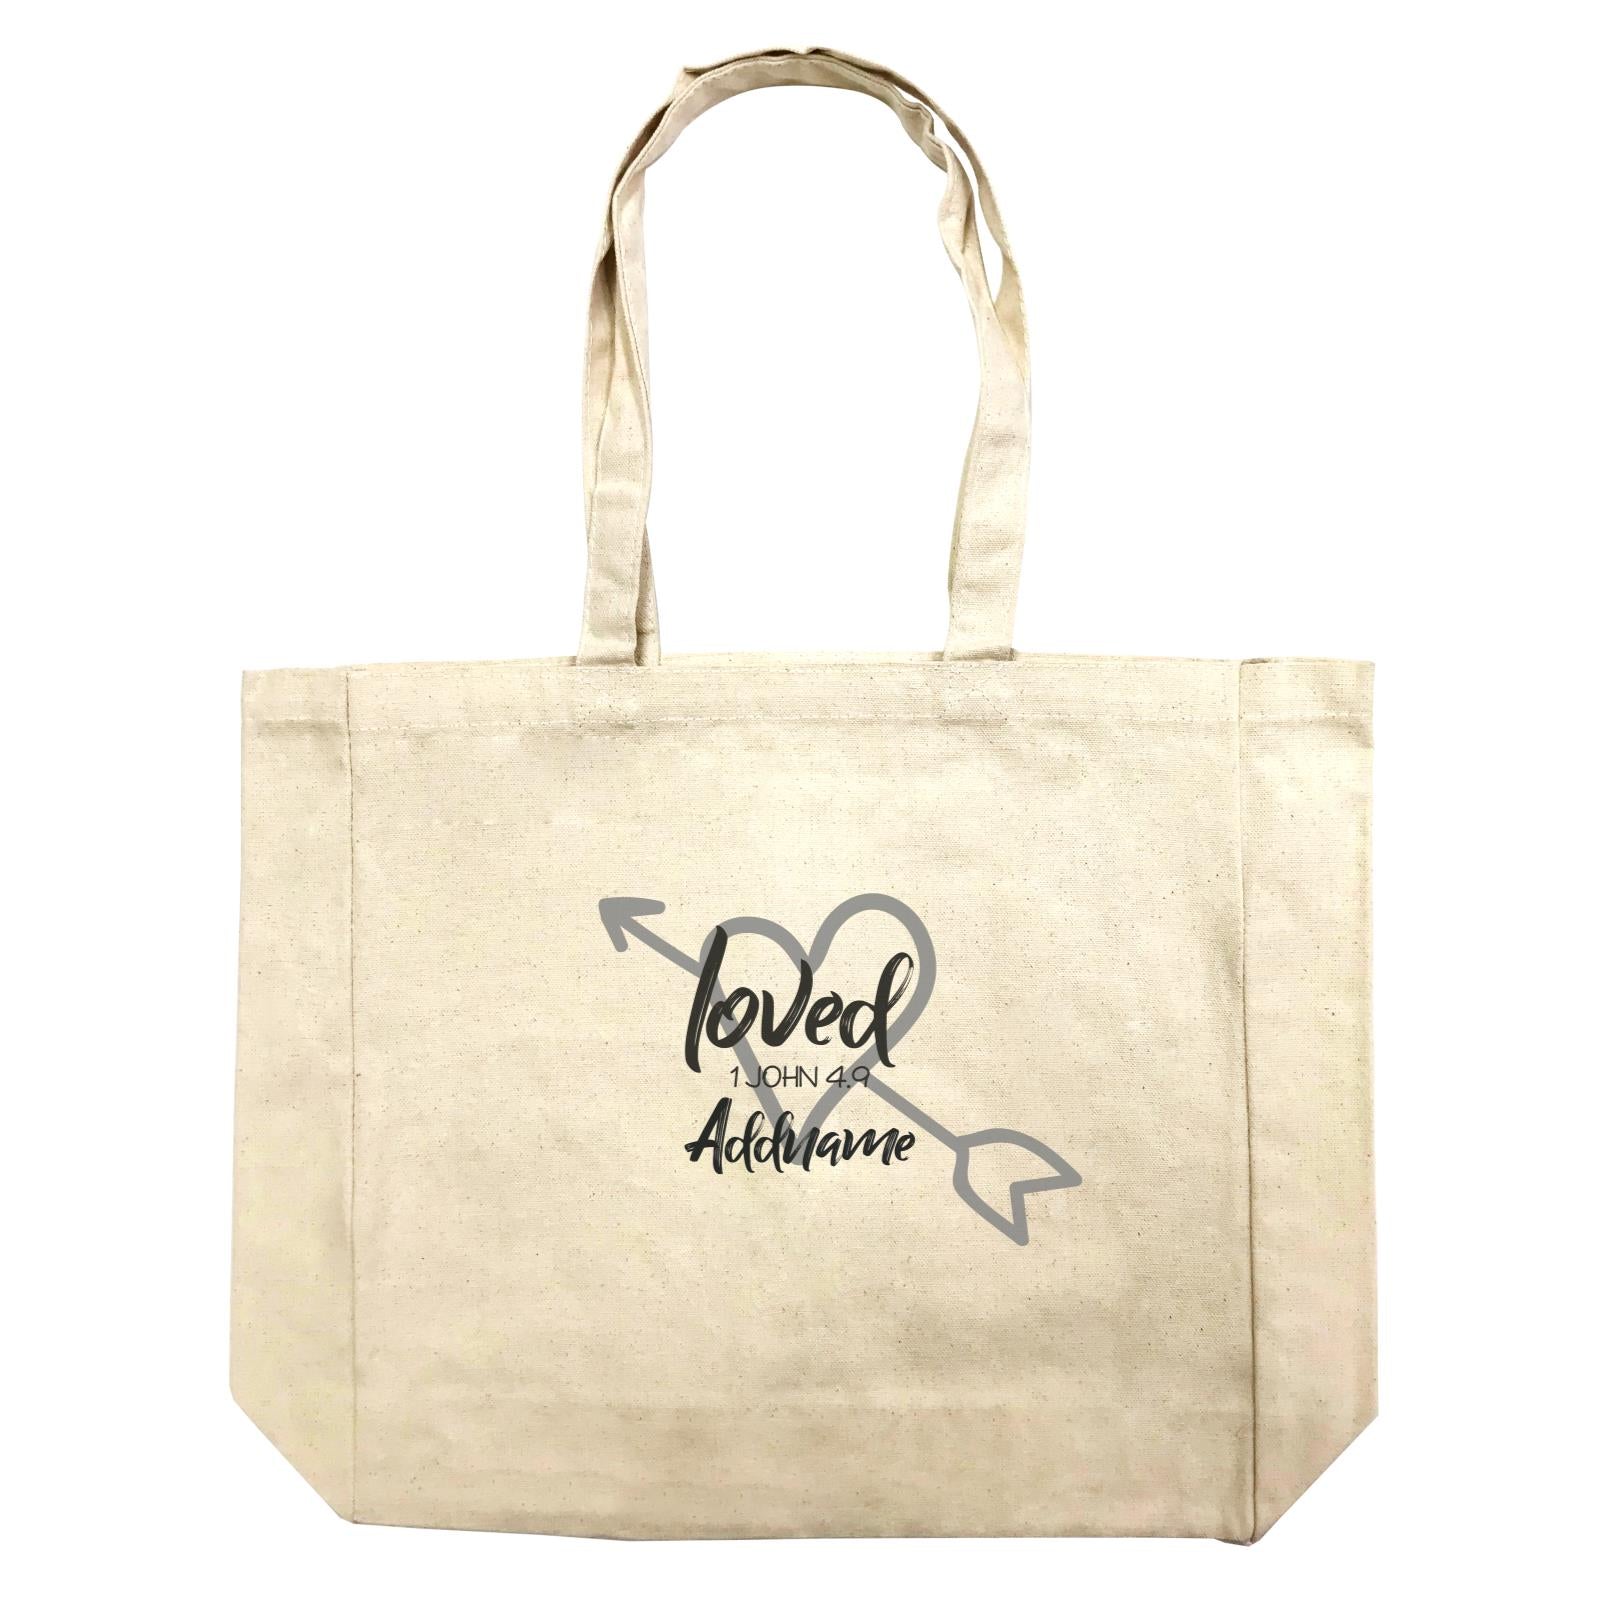 Loved Family Loved With Heart And Arrow 1 John 4.9 Addname Shopping Bag